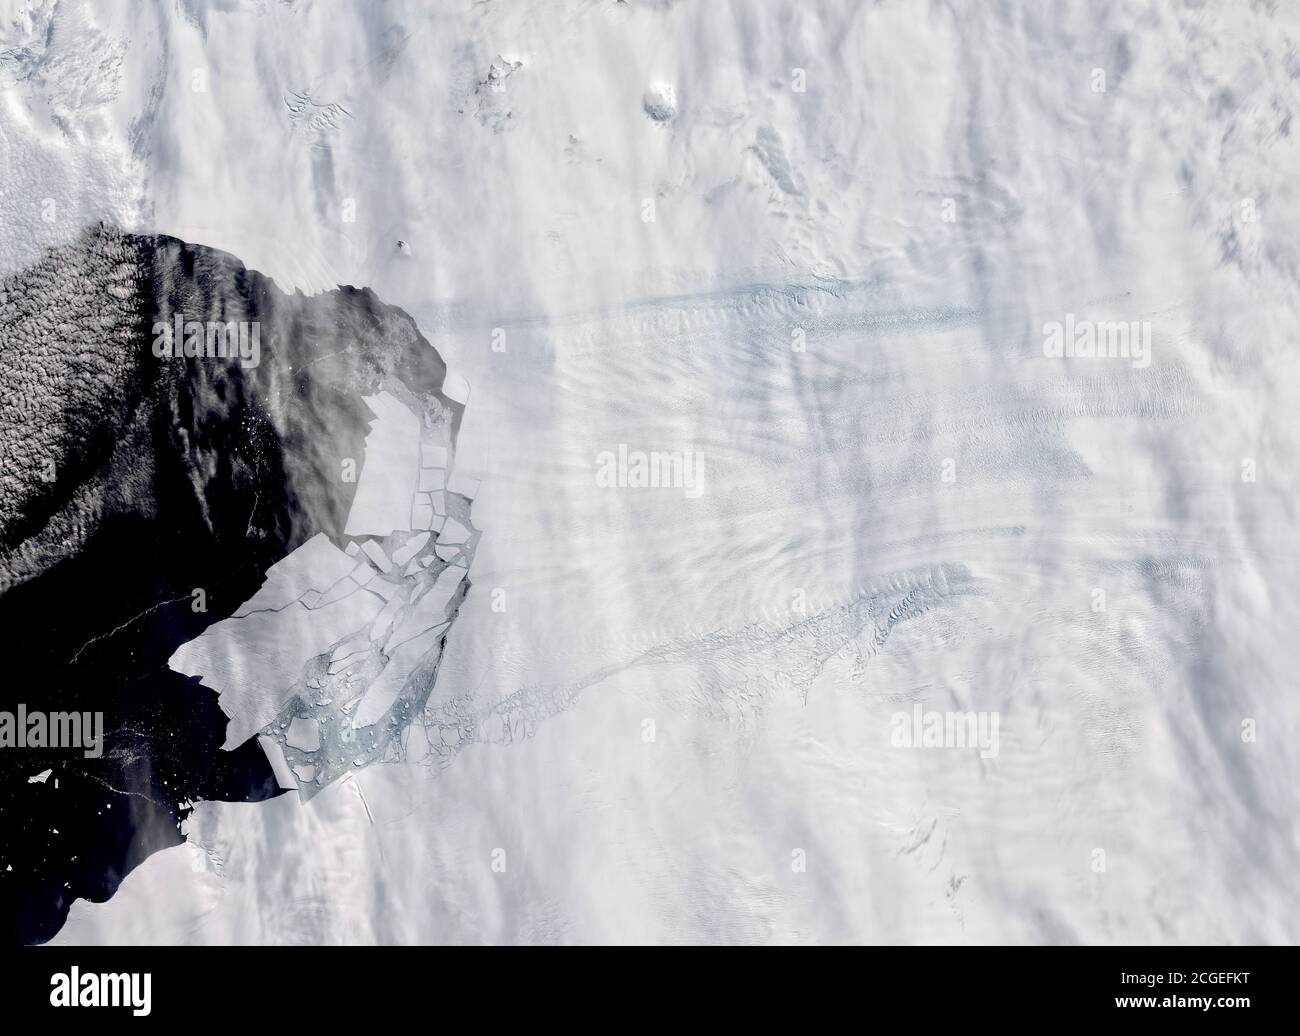 Antarctica’s Pine Island Glacier spawning new icebergs in Feb 2020. Th eimage shows the glacier and numerous icebergs detaching from the glacier and f Stock Photo